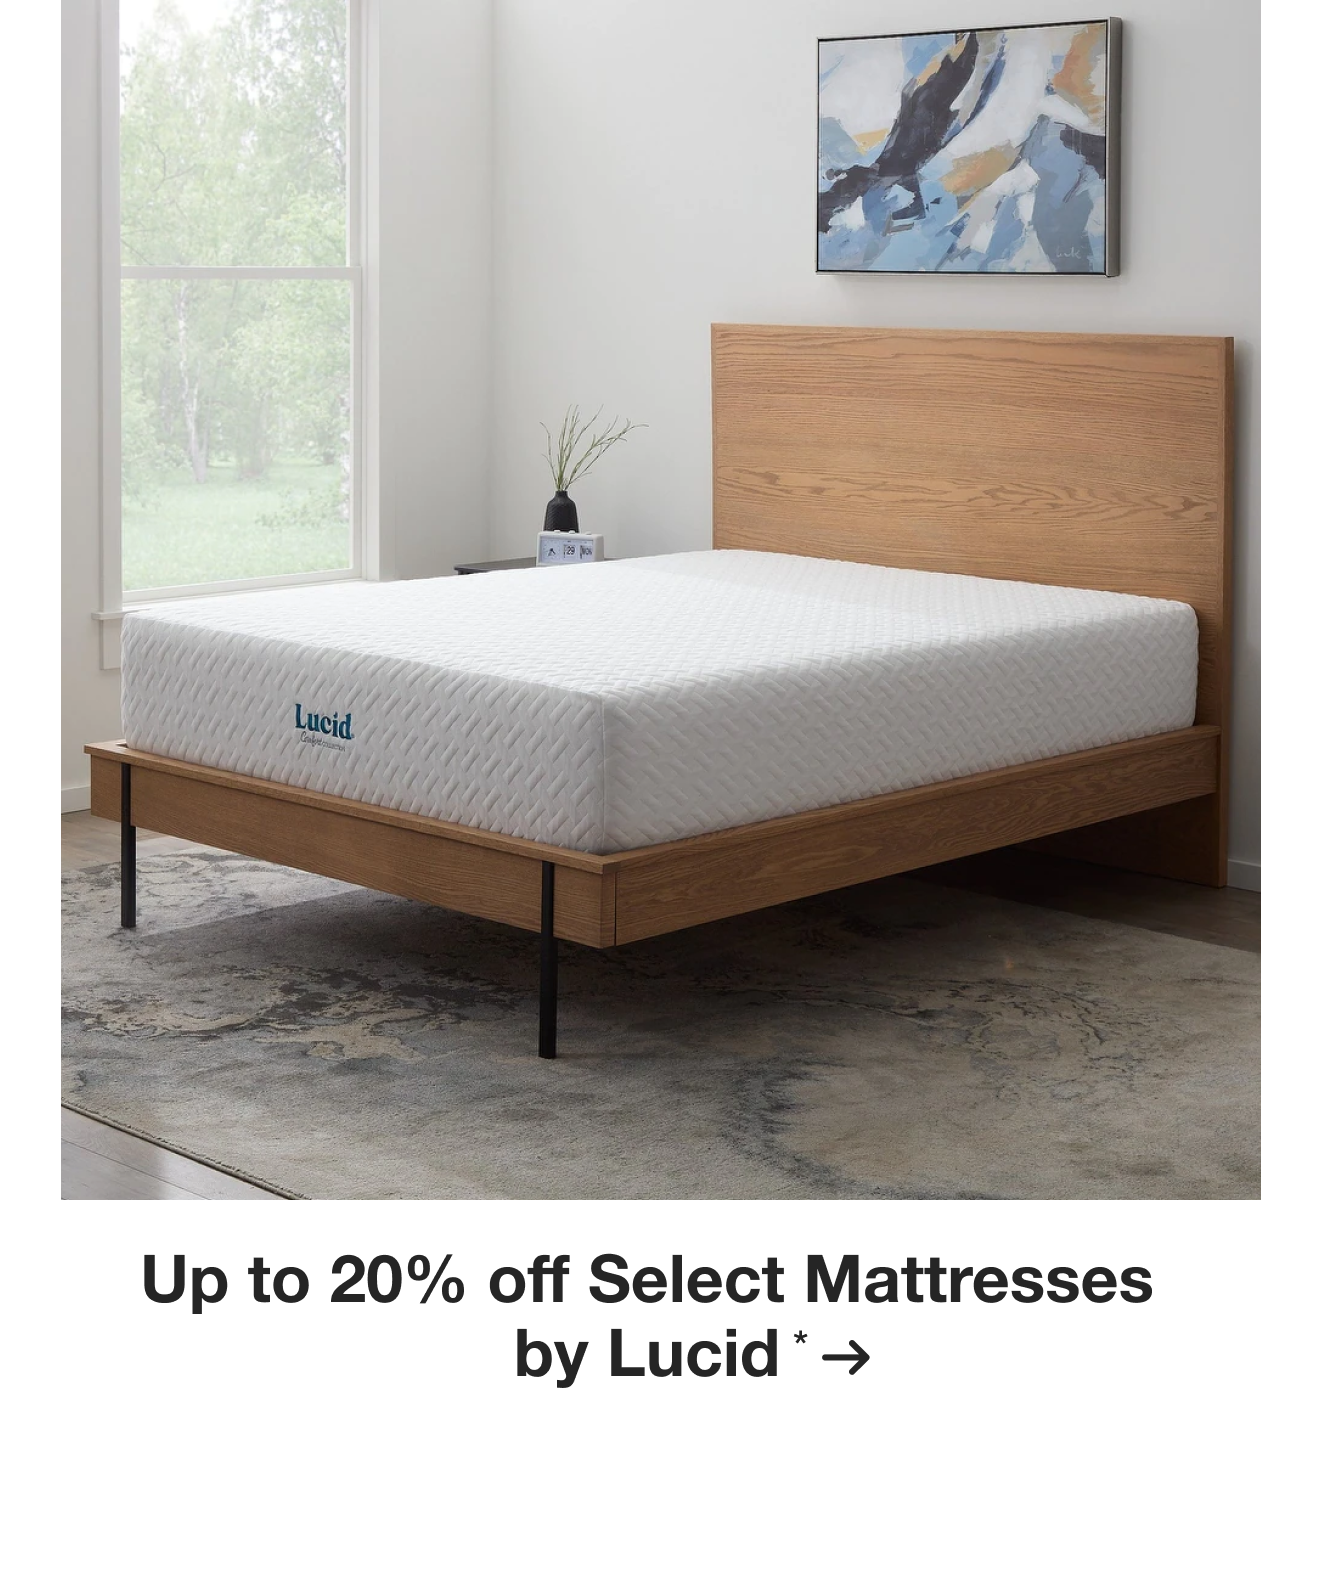 Up to 20% off Select Mattresses by Lucid*